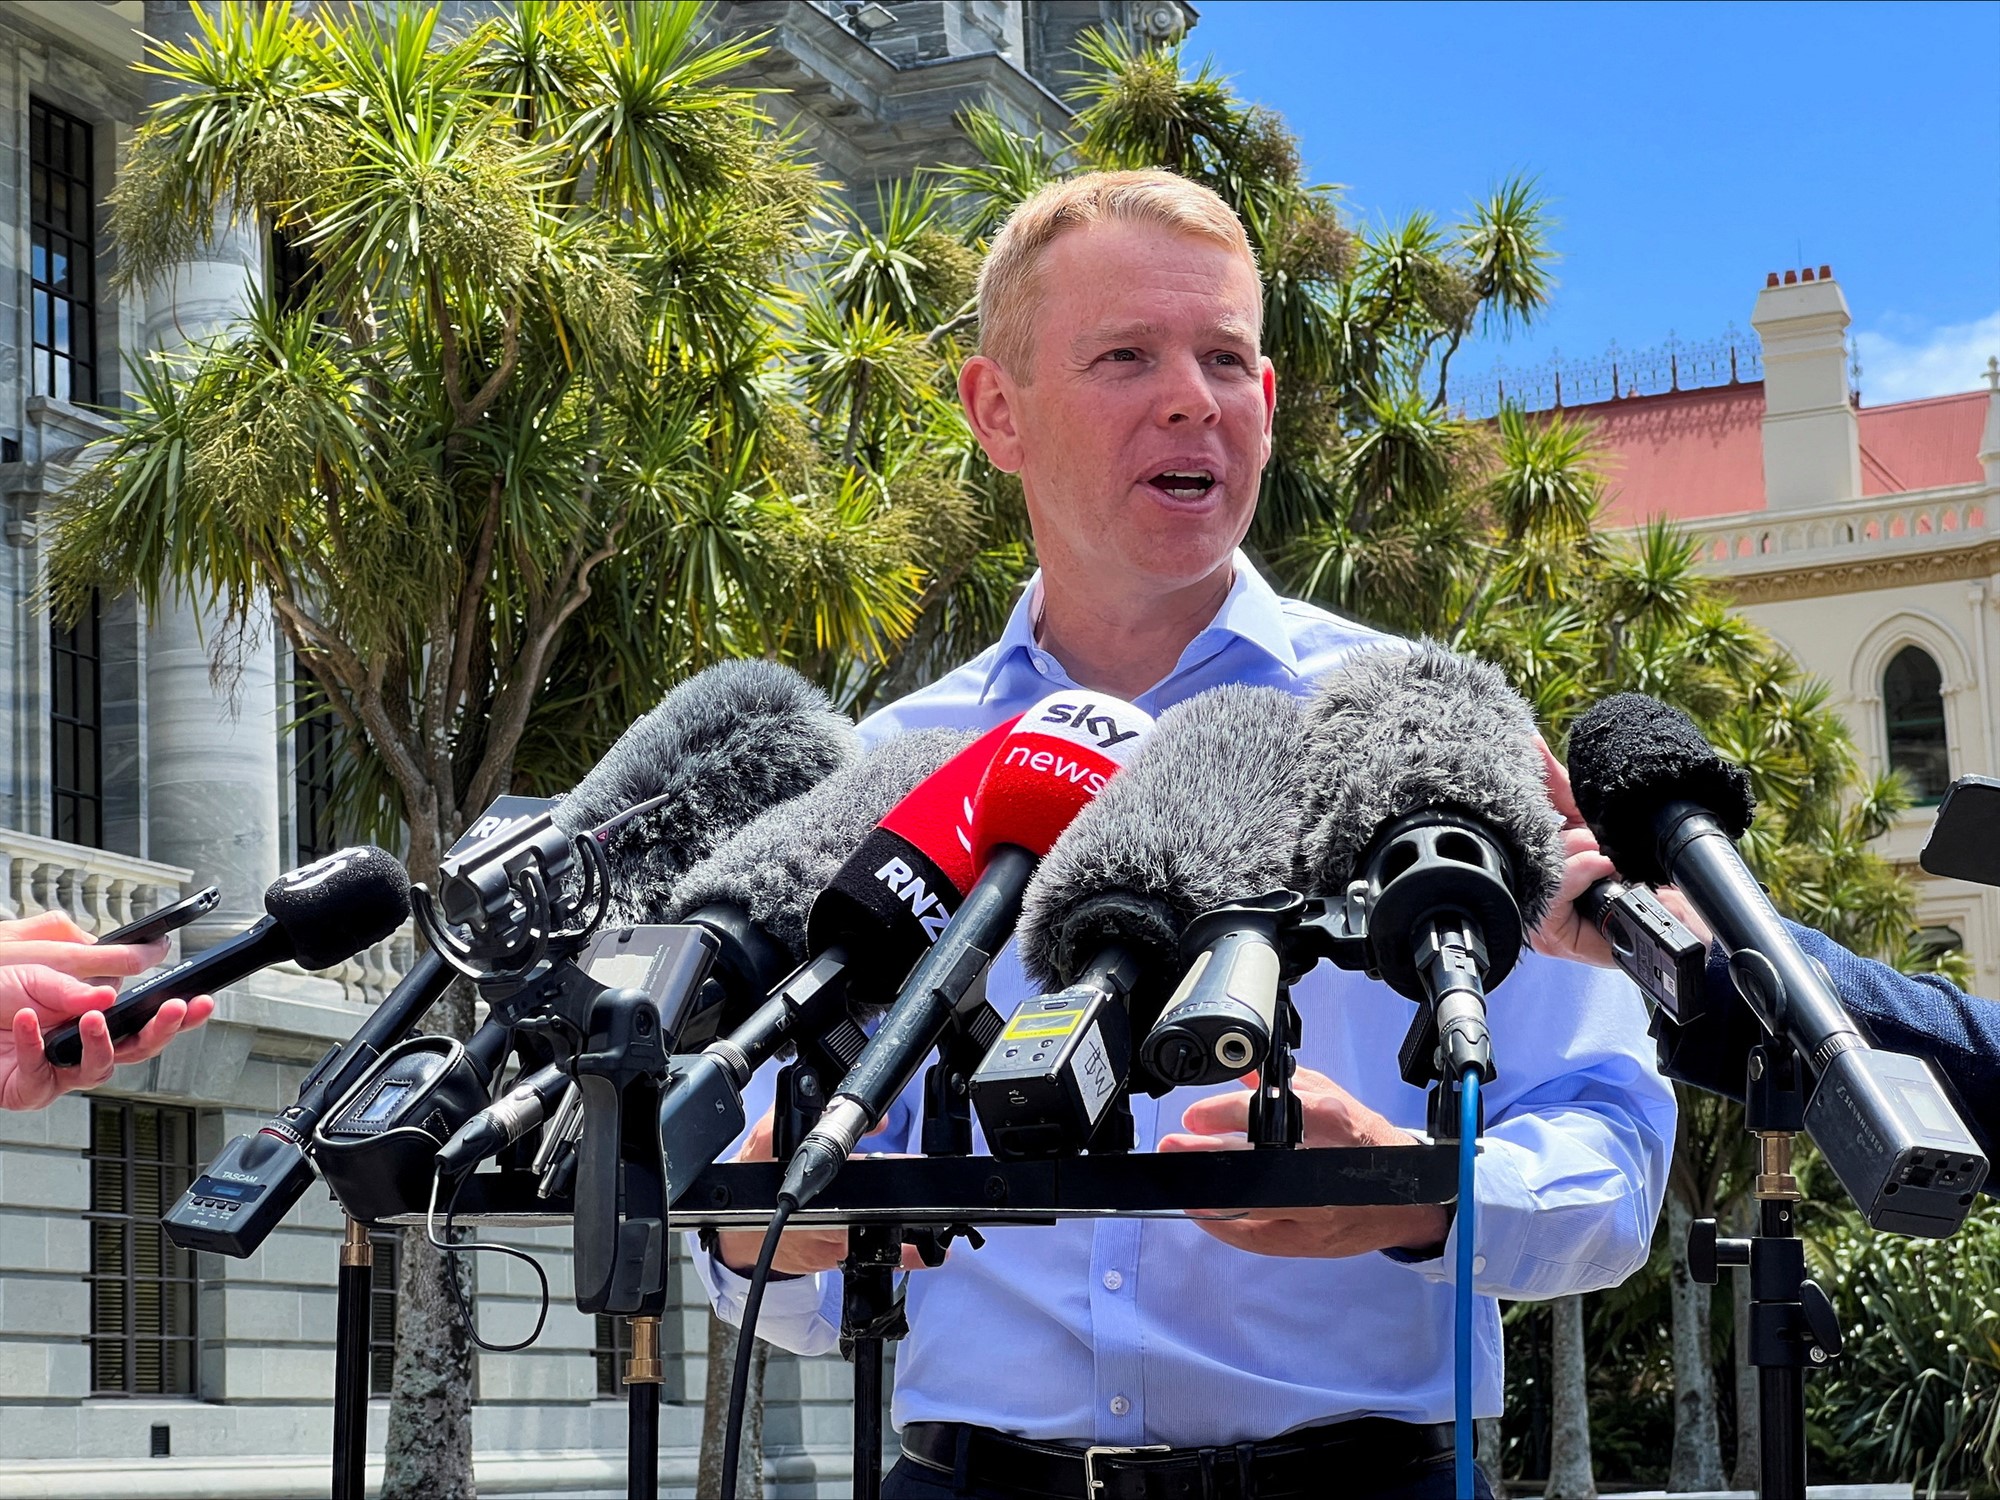 Chris Hipkins stands in front of several media microphones at a press conference.